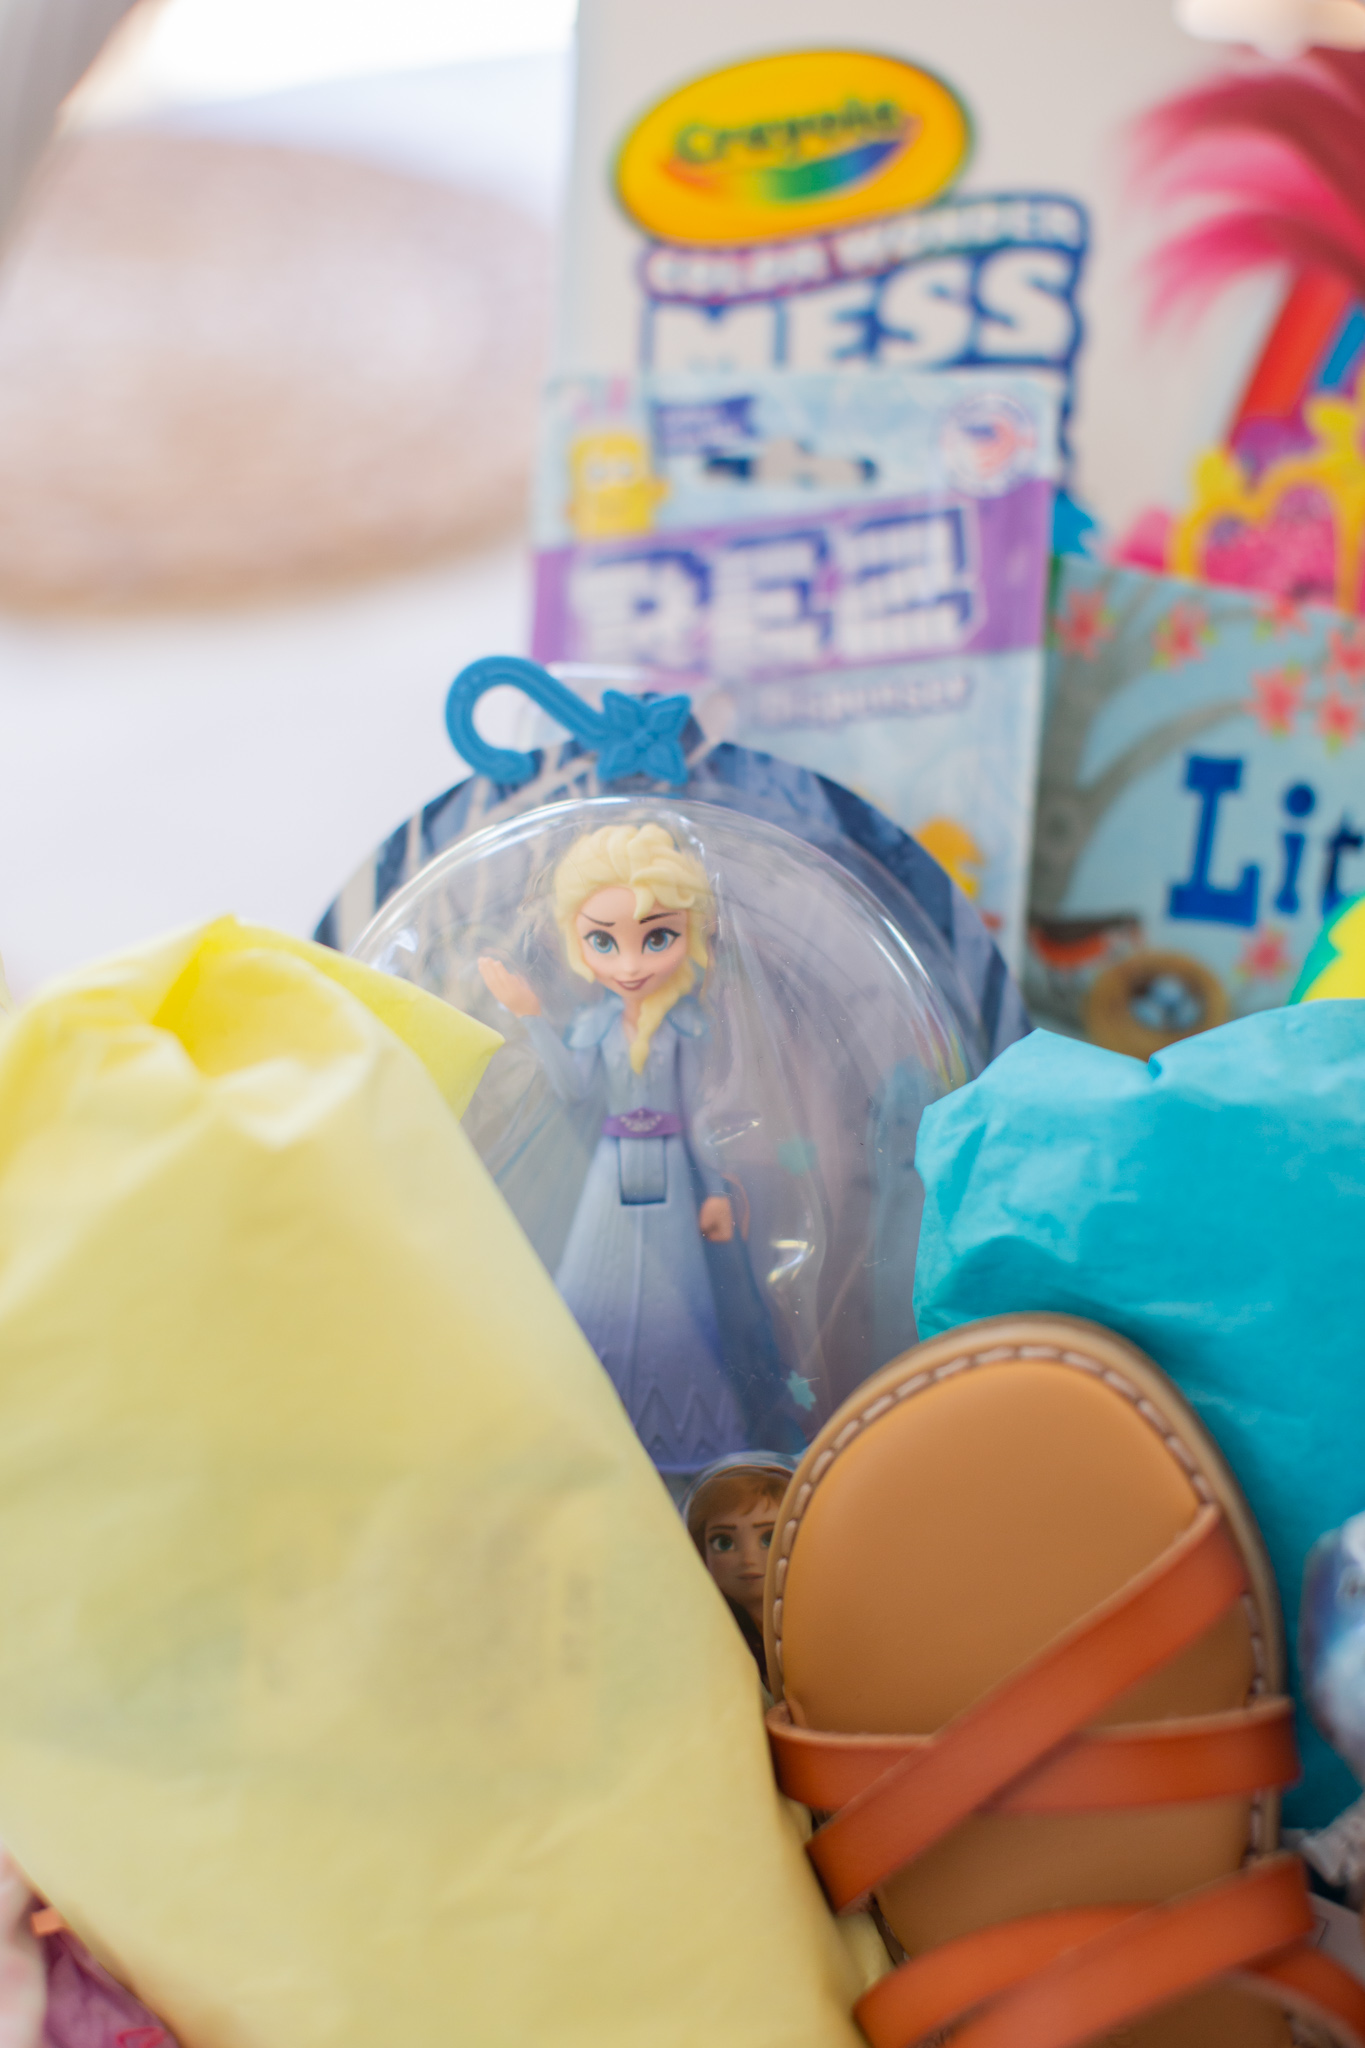 Toddler Easter Basket by popular Ohio lifestyle blog, Coffee Beans and Bobby Pins: image of Amazon Crayola Baby Shark Color Wonder Coloring Pages, Cat & Jack sandals, Forzen II Elsa figure snad Pez dispenser. 